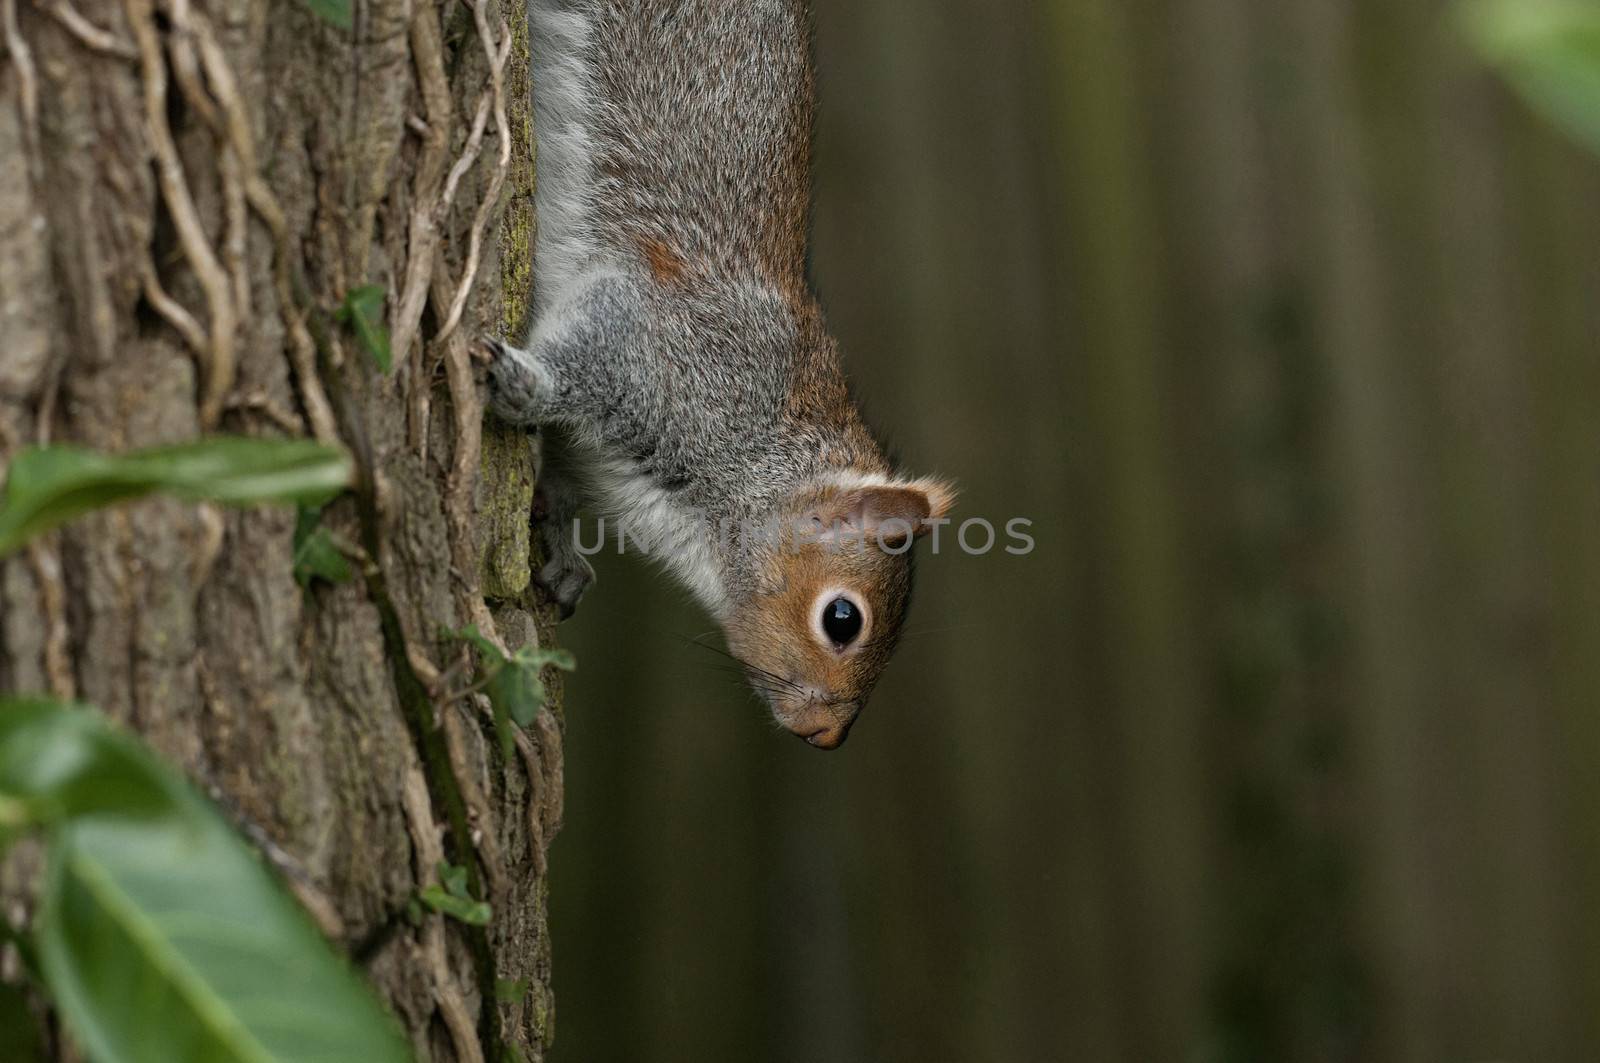 Squirrels belong to a large family of small or medium-sized rodents called the Sciuridae.